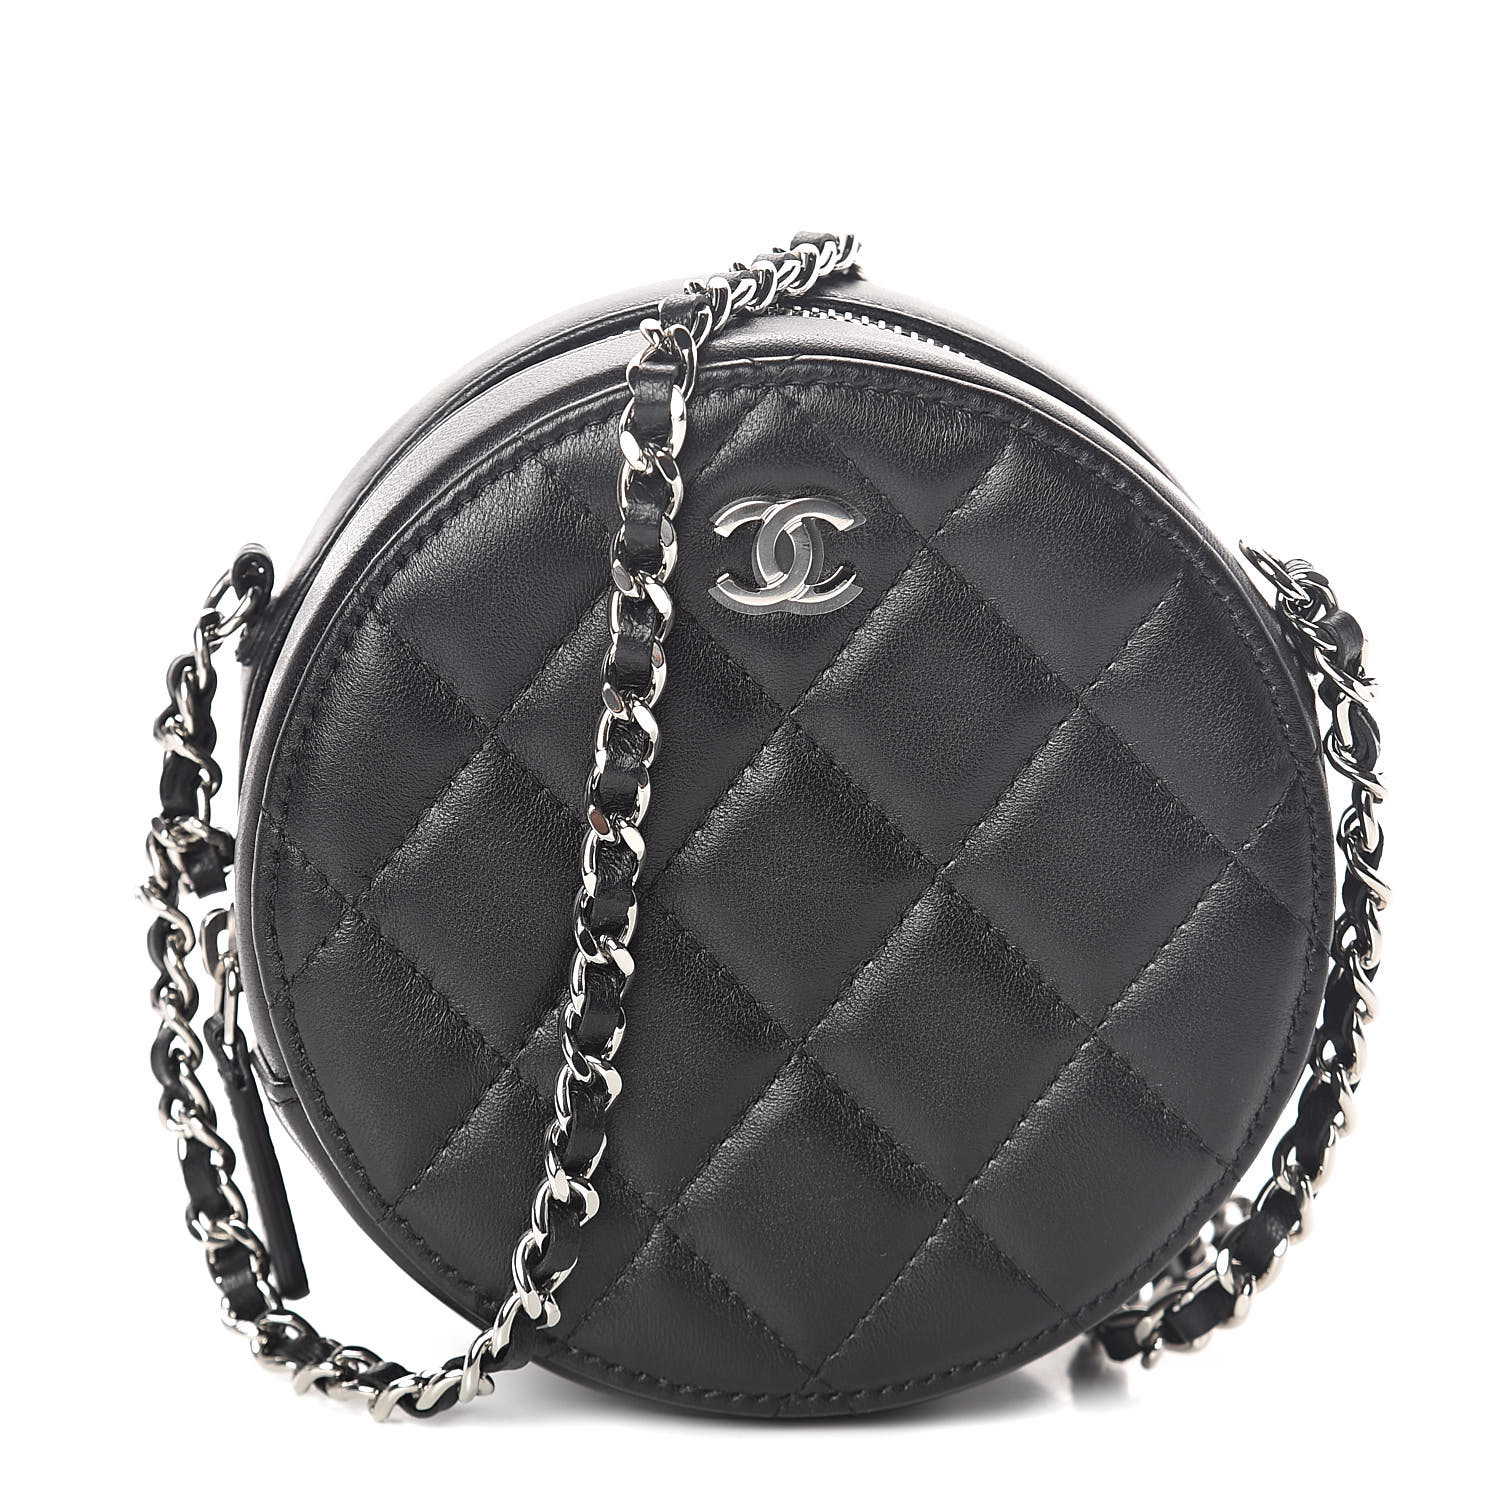 CHANEL Lambskin Quilted Round Clutch With Chain Black 517067 | FASHIONPHILE